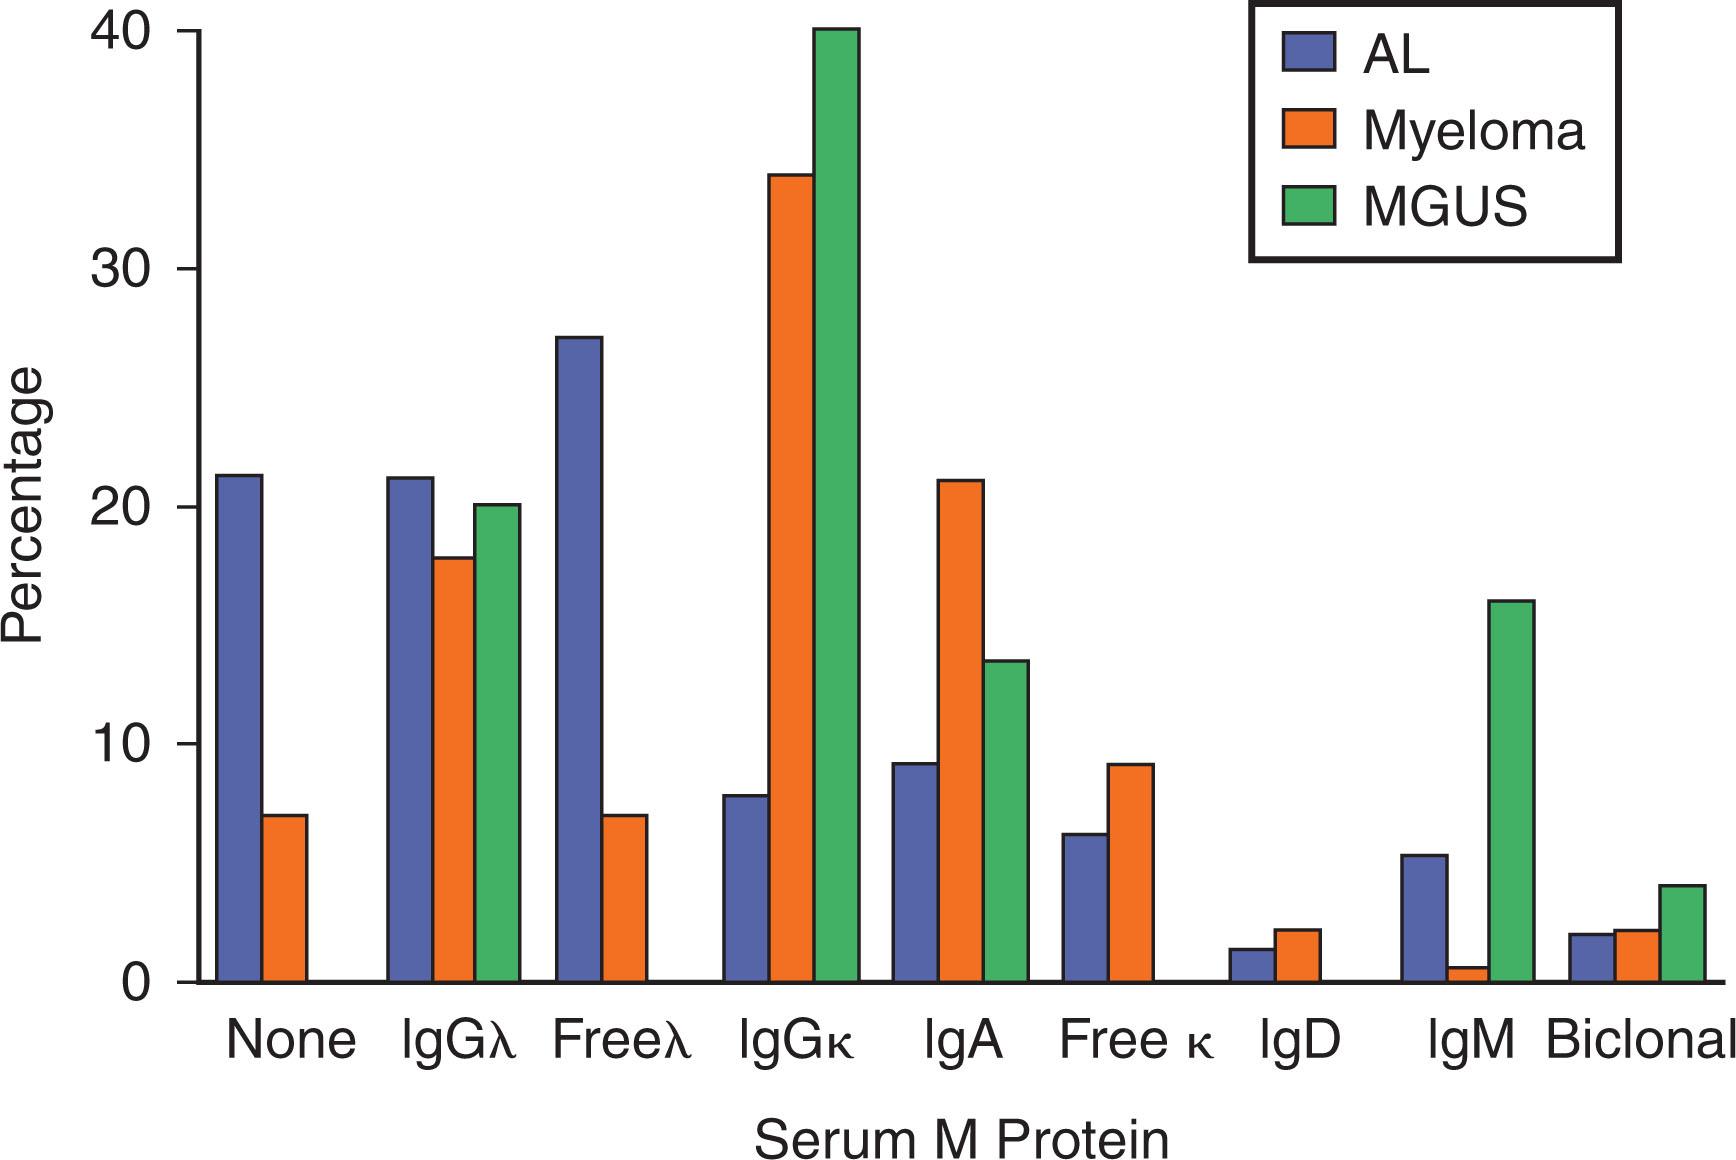 Figure 93.2, DISTRIBUTION OF HEAVY- AND LIGHT-CHAIN PROTEINS IN MYELOMA, MONOCLONAL GAMMOPATHY OF UNDETERMINED SIGNIFICANCE, AND AMYLOID LIGHT-CHAIN AMYLOIDOSIS.